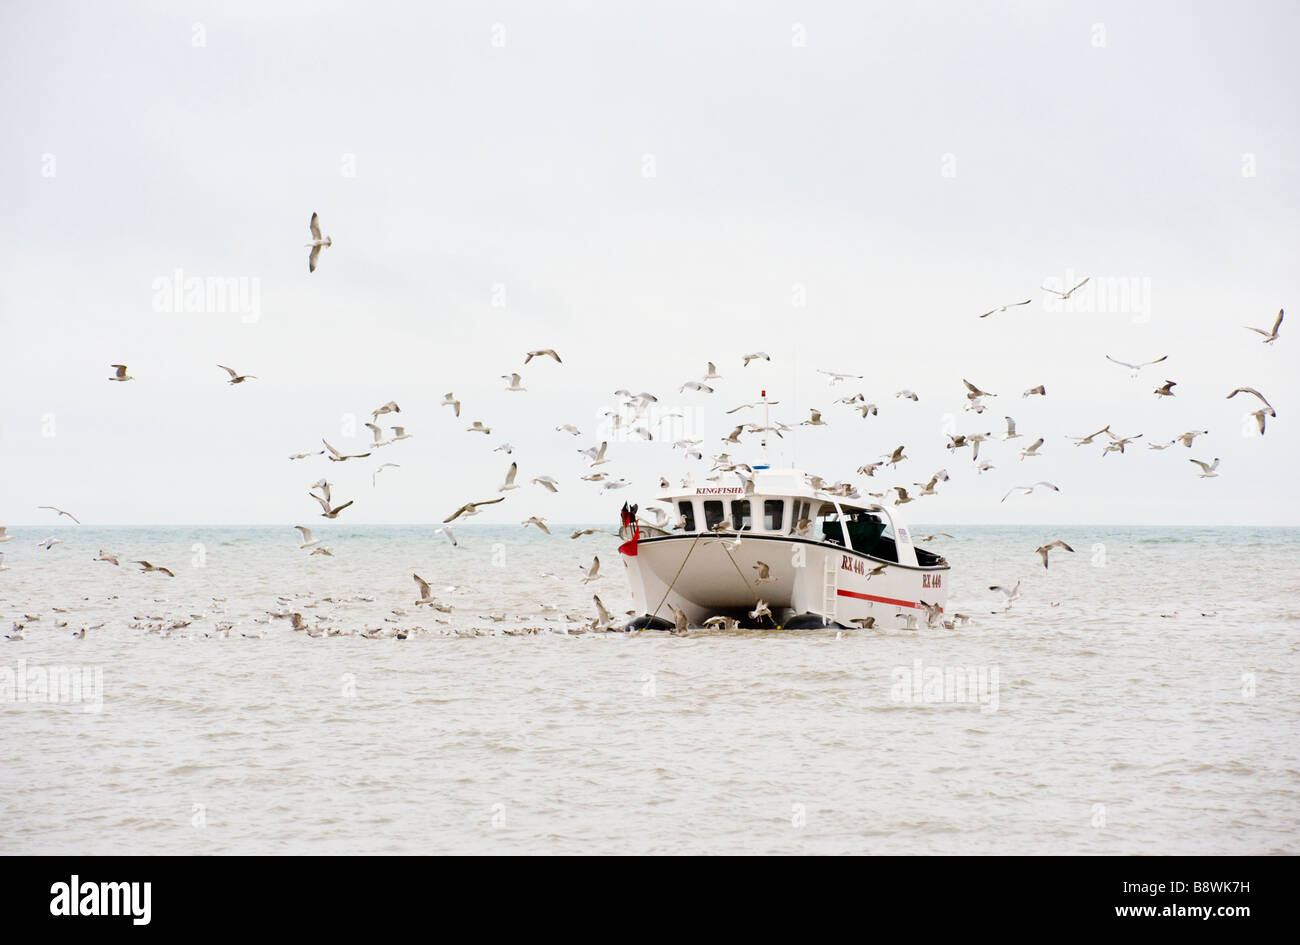 A catamaran fishing boat at sea being followed by a flock of seagulls Stock Photo